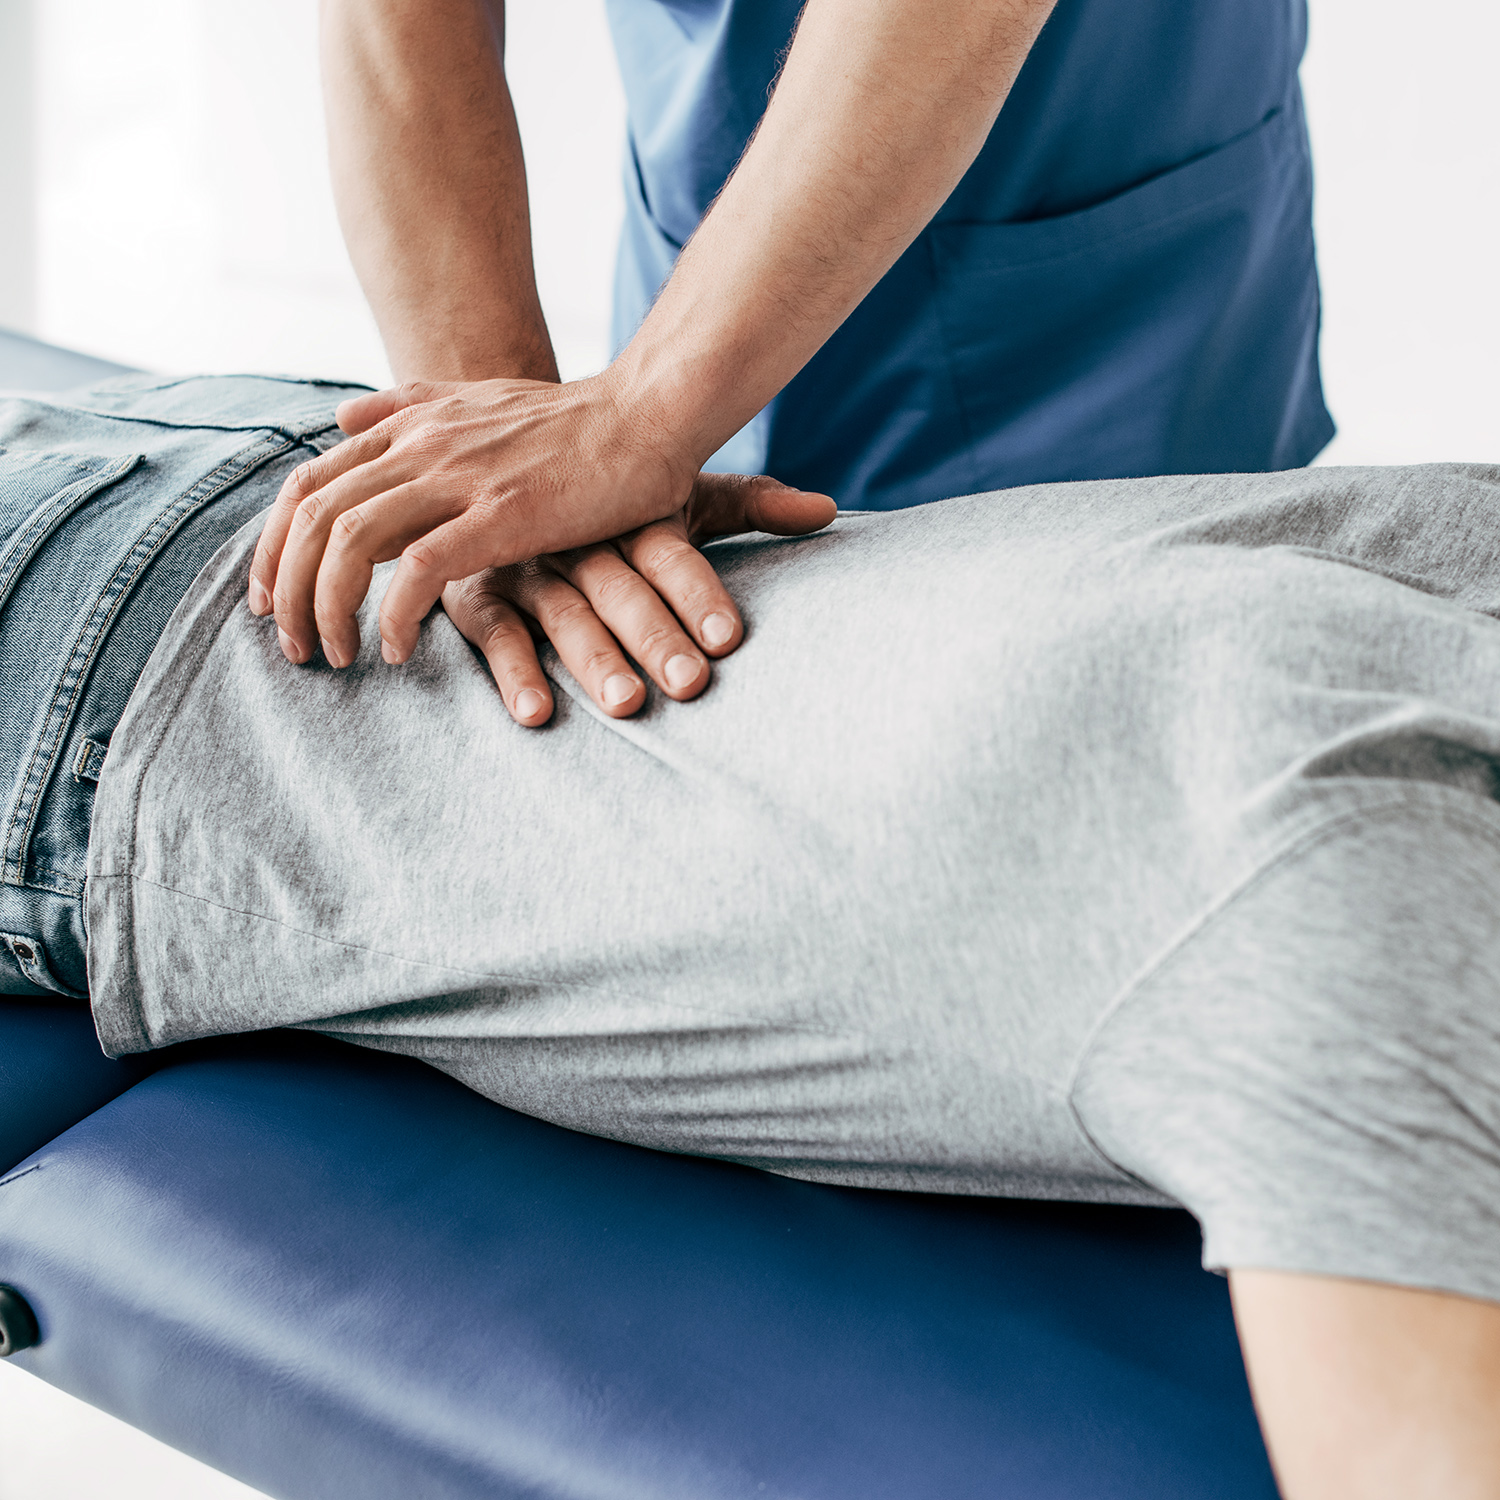 Safety of Chiropractic Adjustments